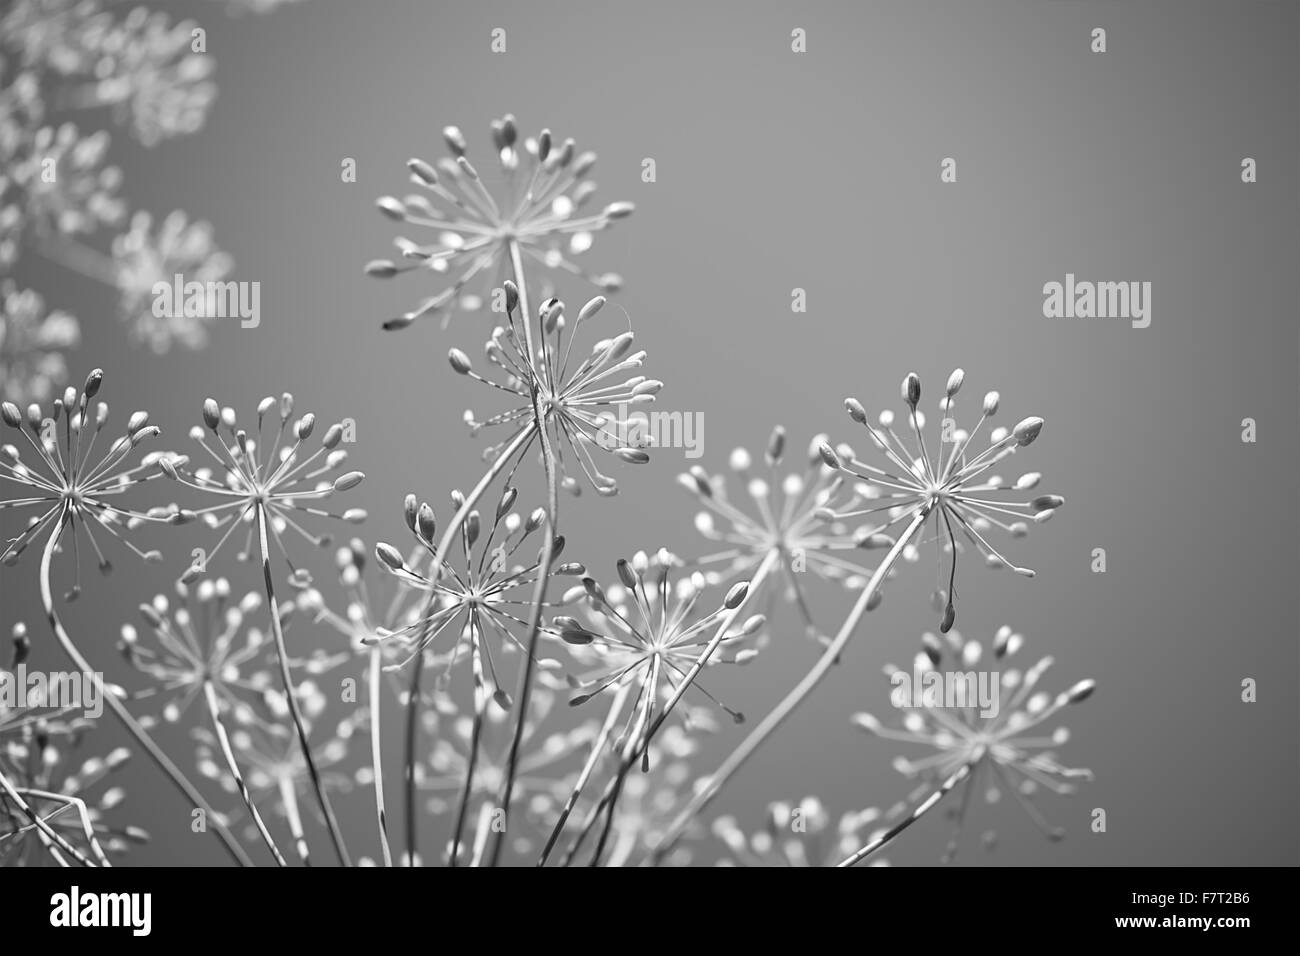 Monochrome black and white floral background for spring Stock Photo